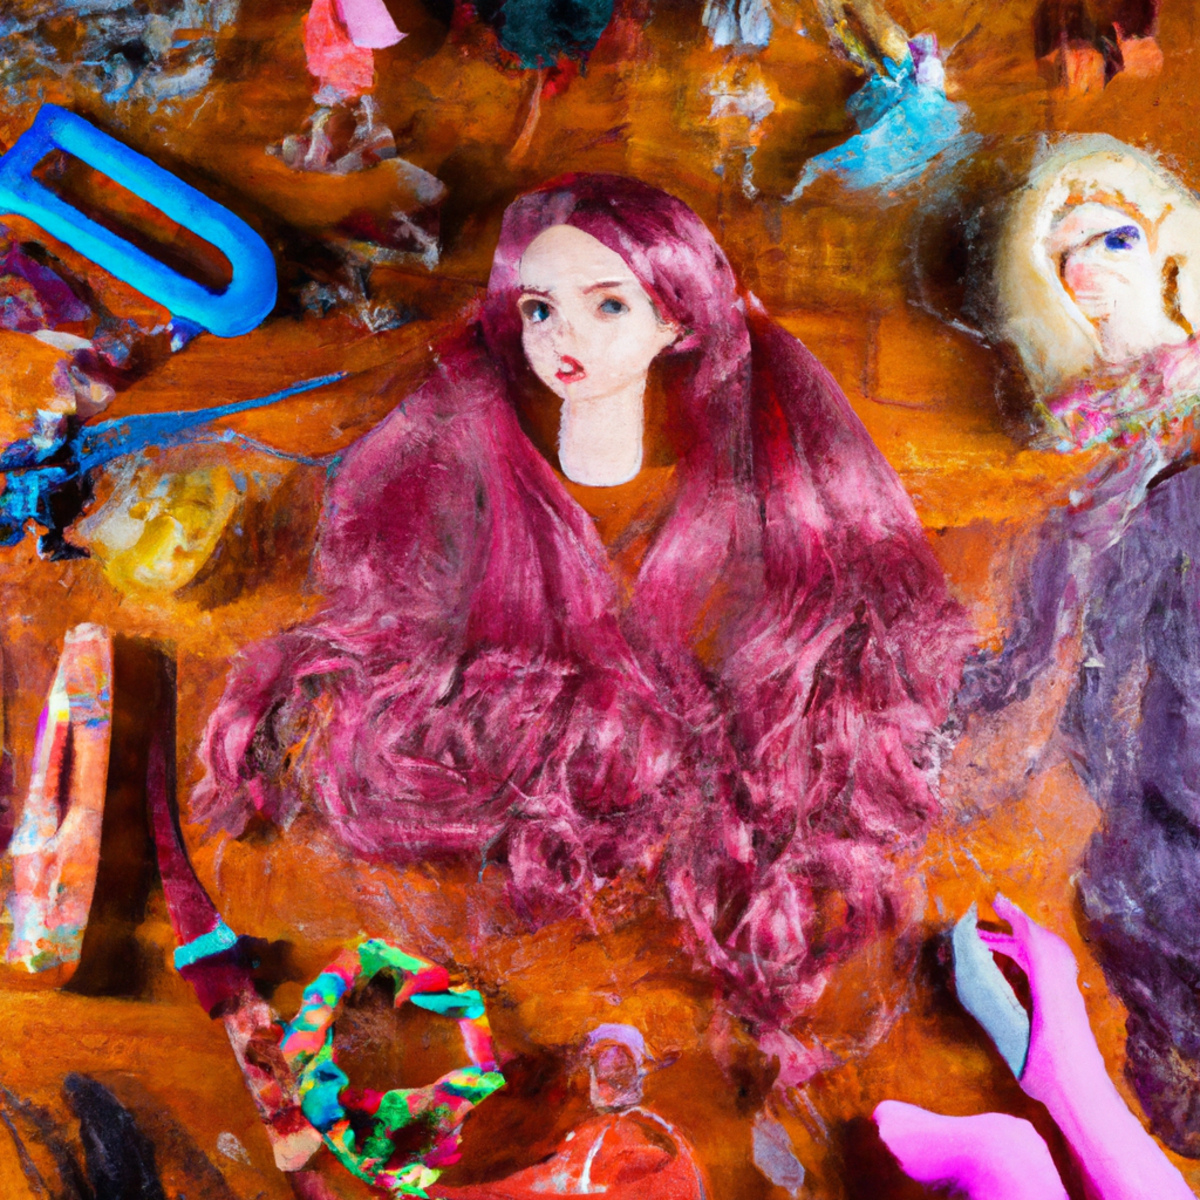 A table with hair accessories, colorful extensions, and a braided mannequin head, showcasing a trending hairstyle for 2023.